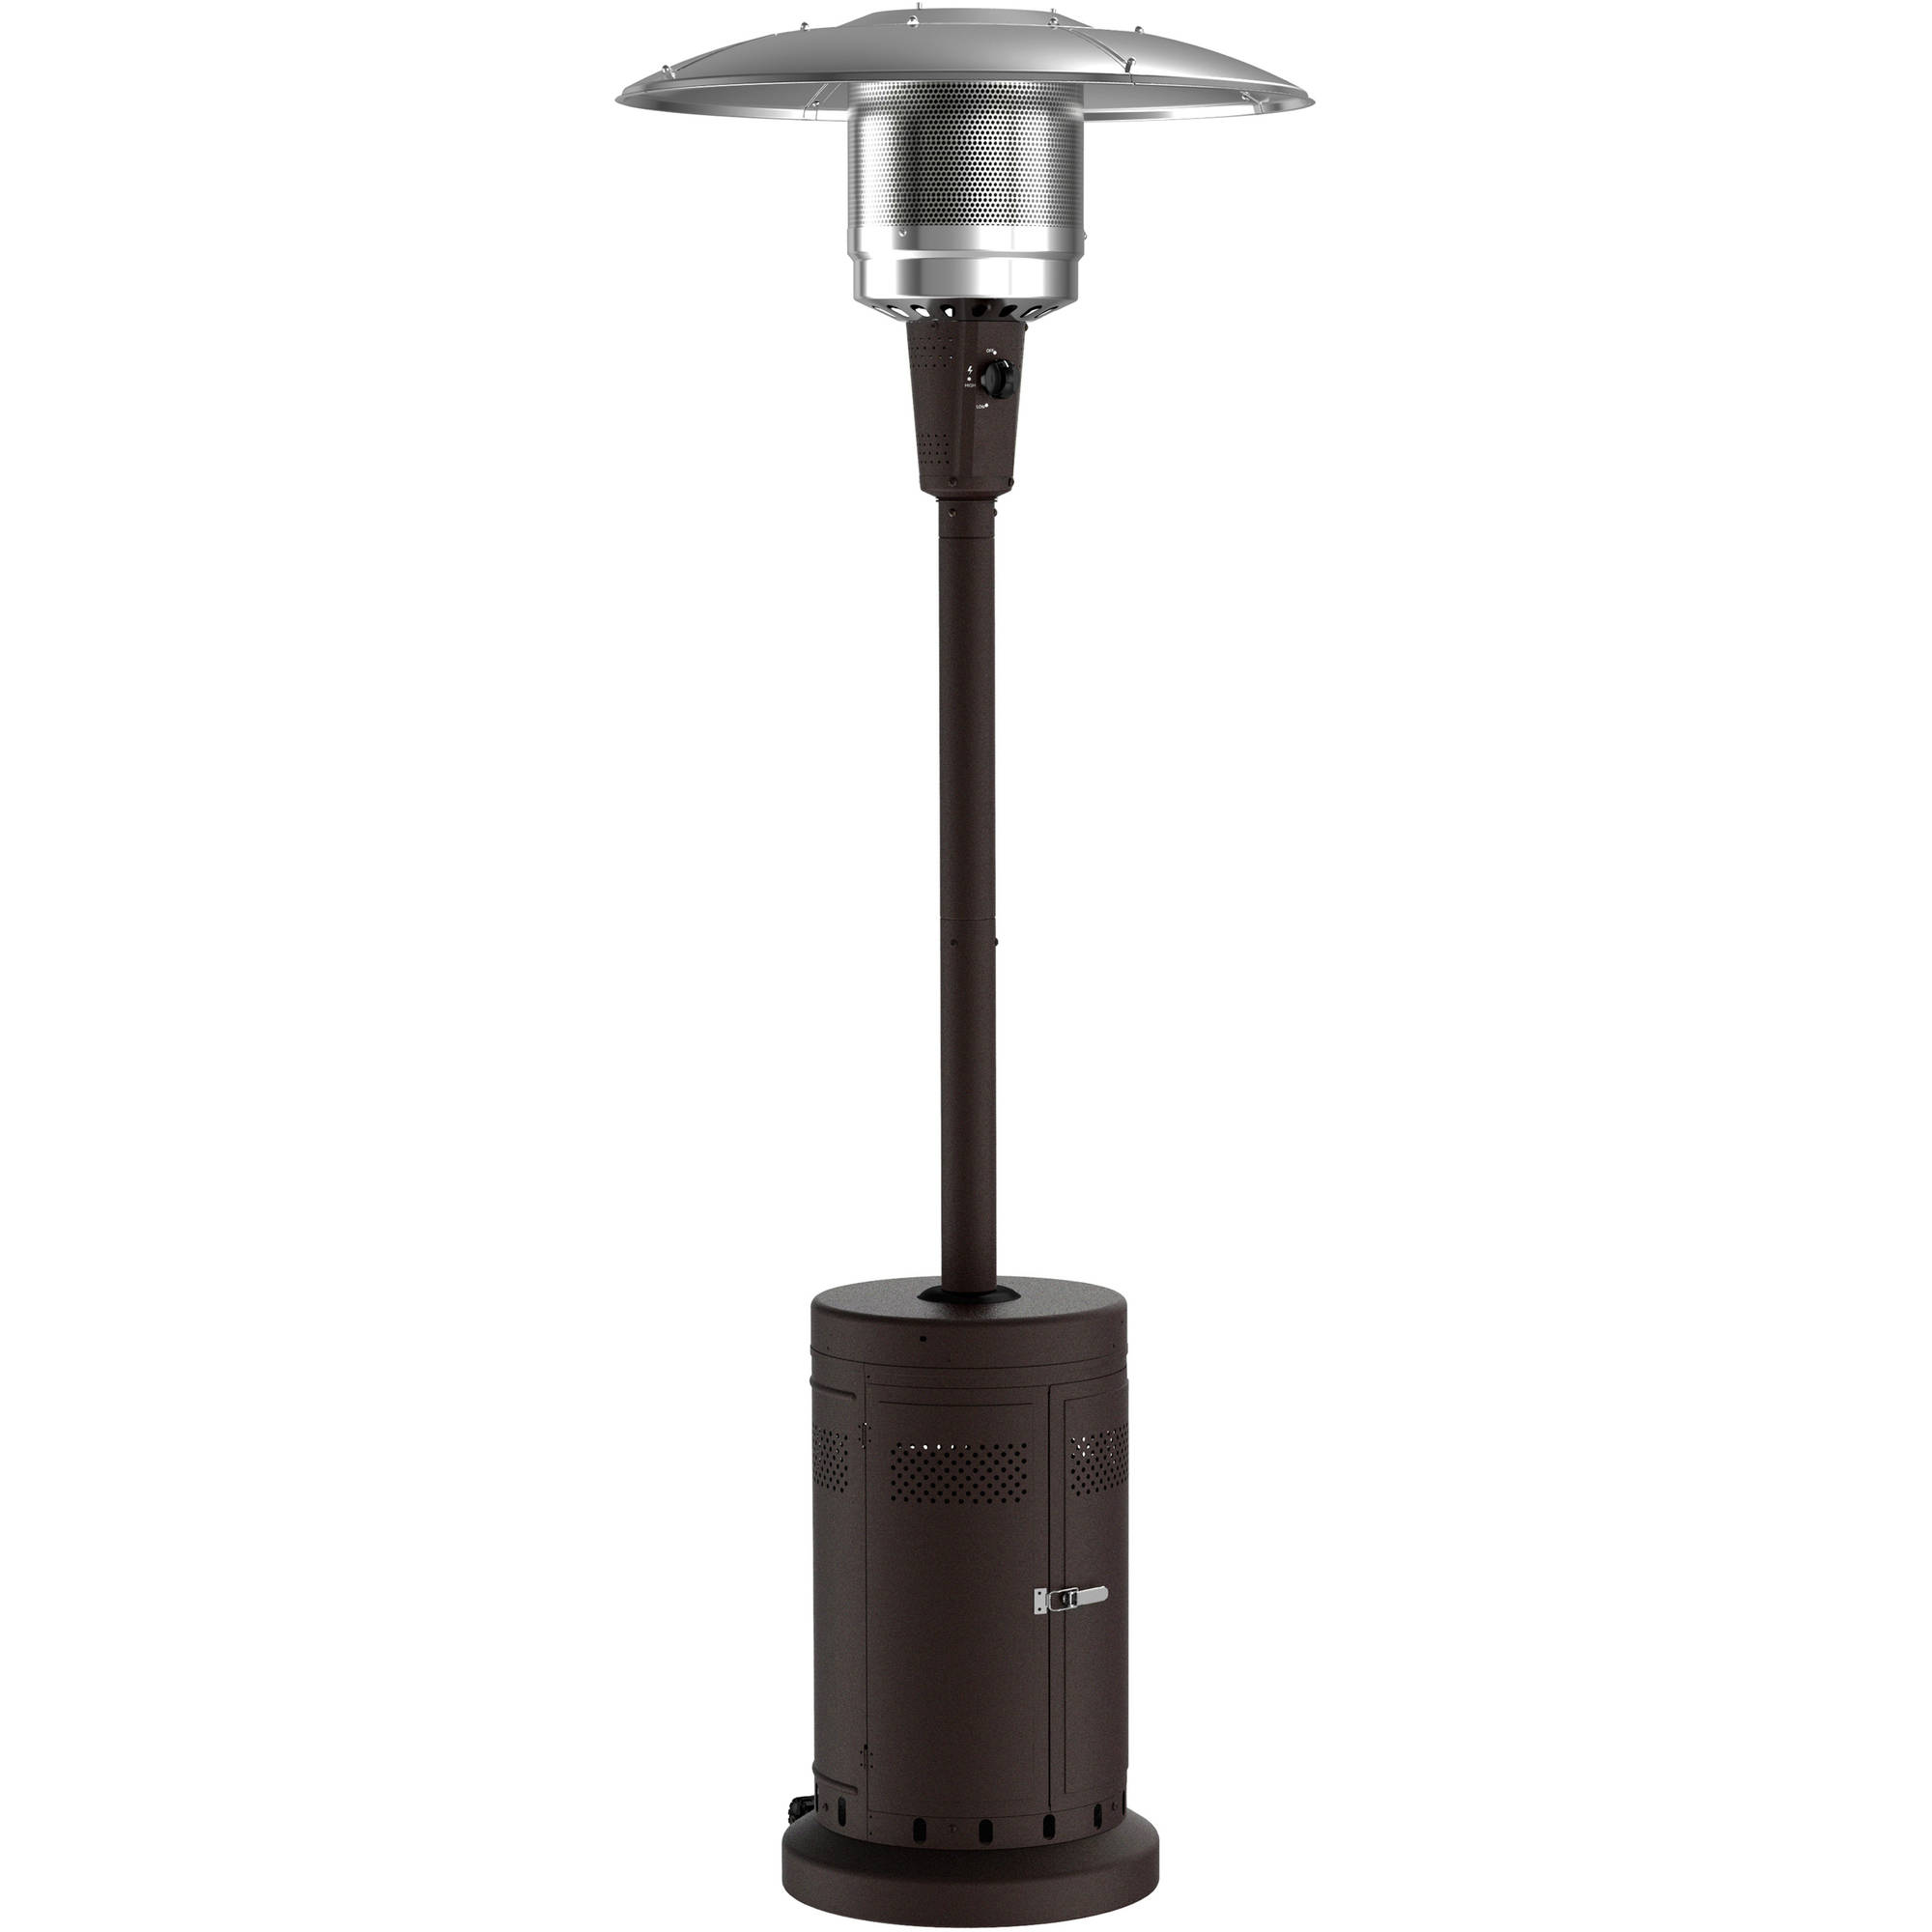 Mainstays Large Outdoor Patio Heater, Powder Coat Brown - image 2 of 4